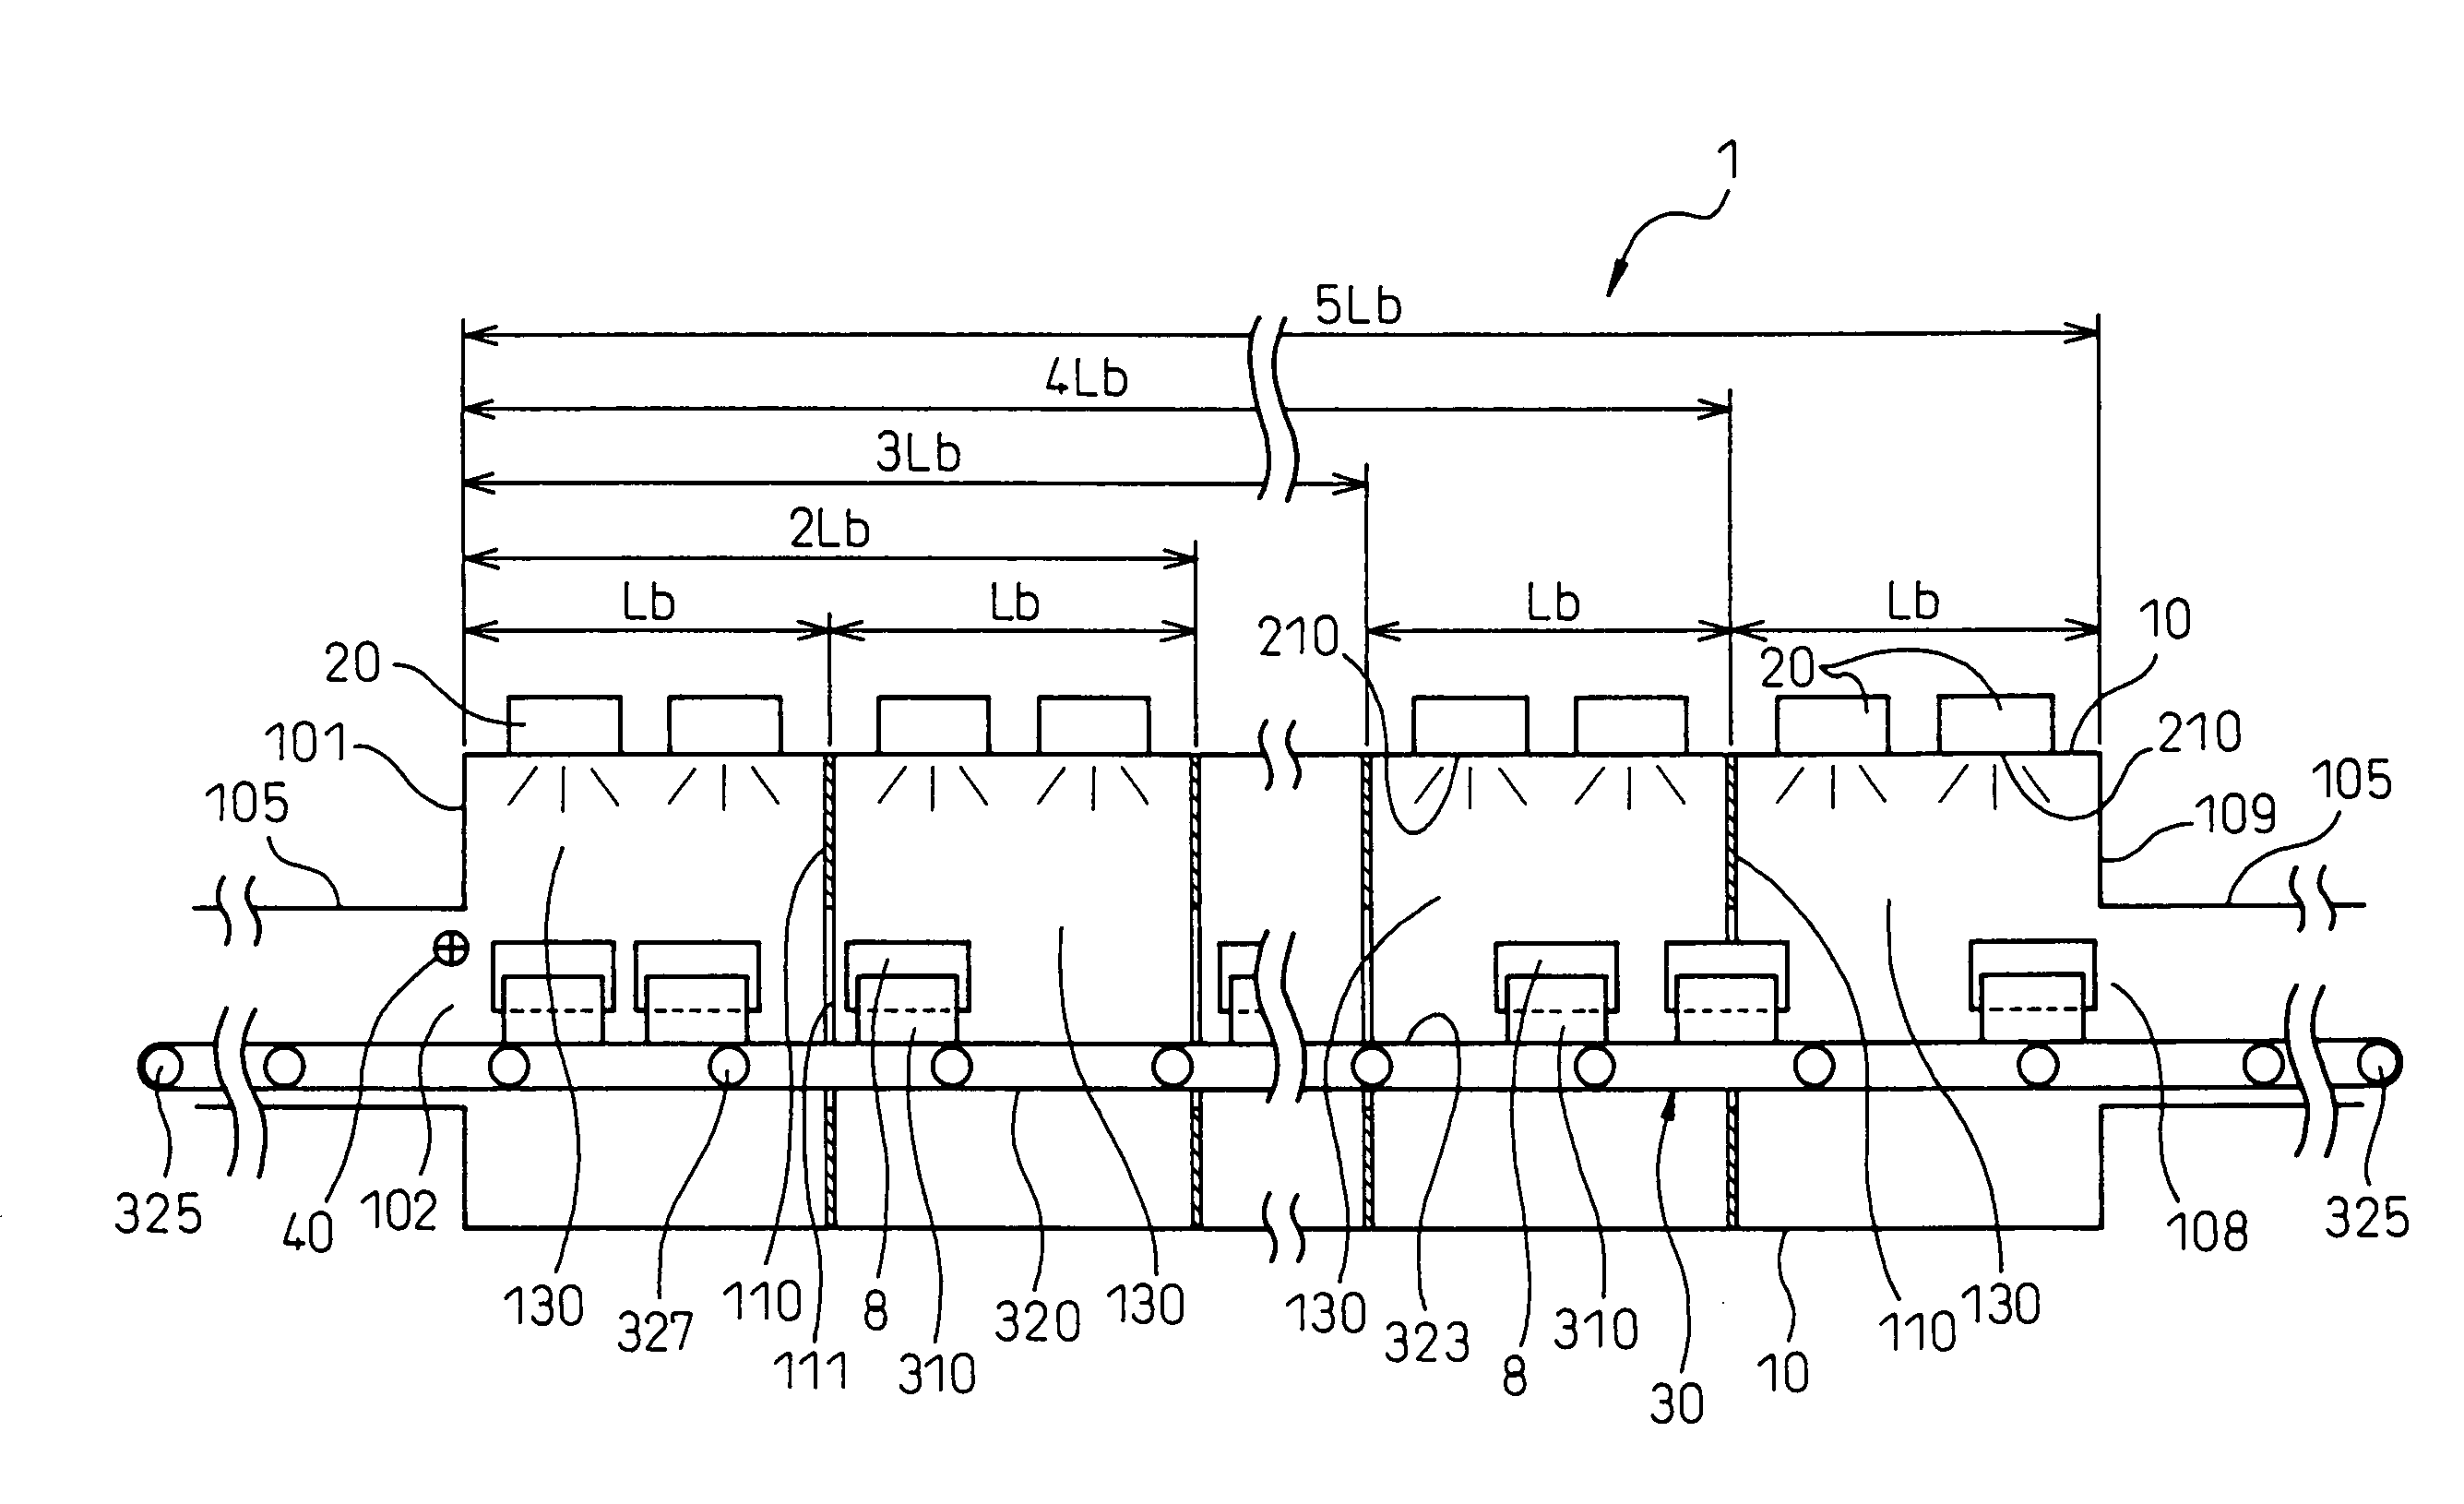 Apparatus for drying ceramic molded articles using microwave energy